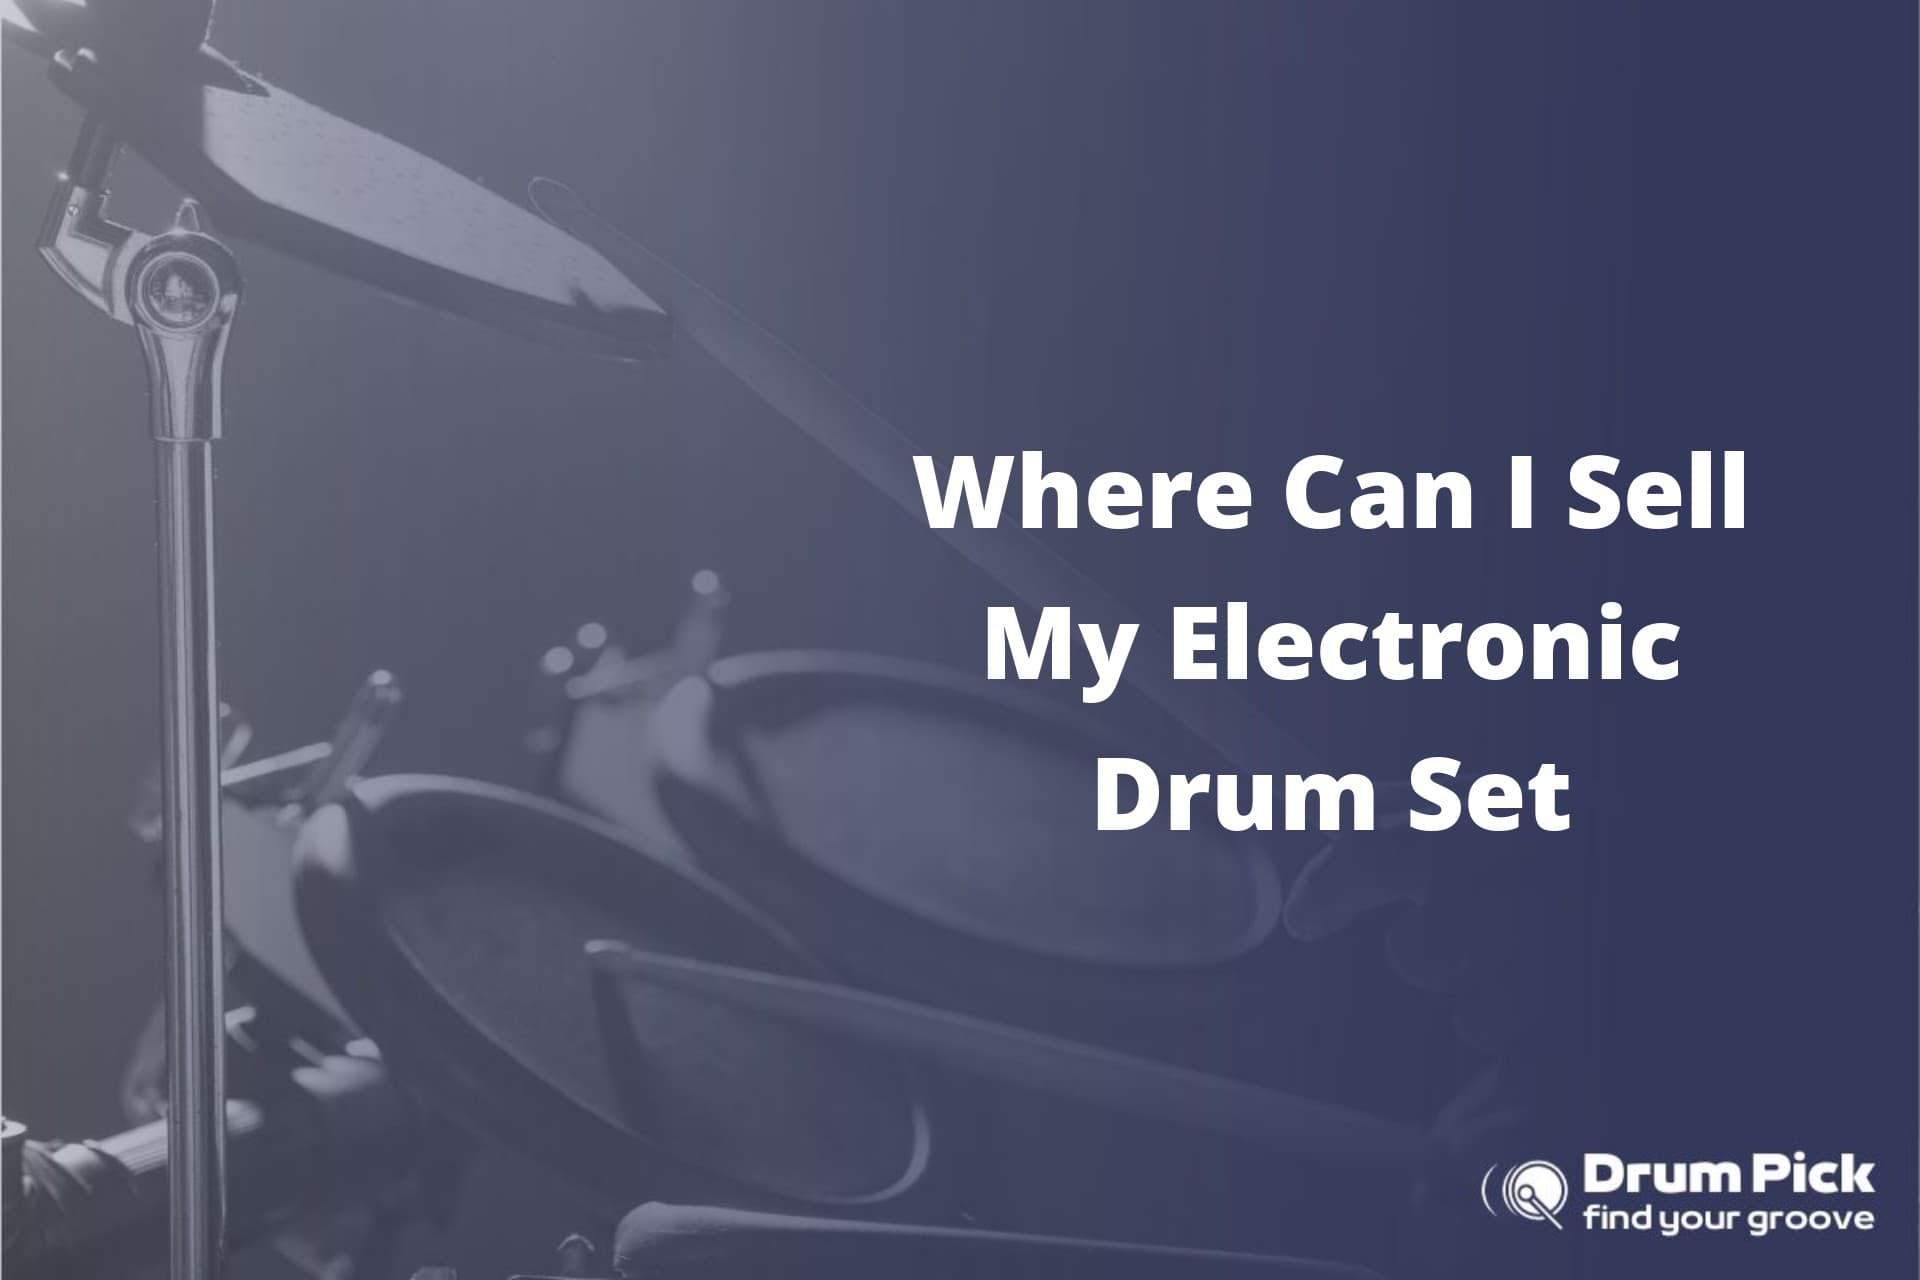 Where Can I Sell My Electronic Drum Set